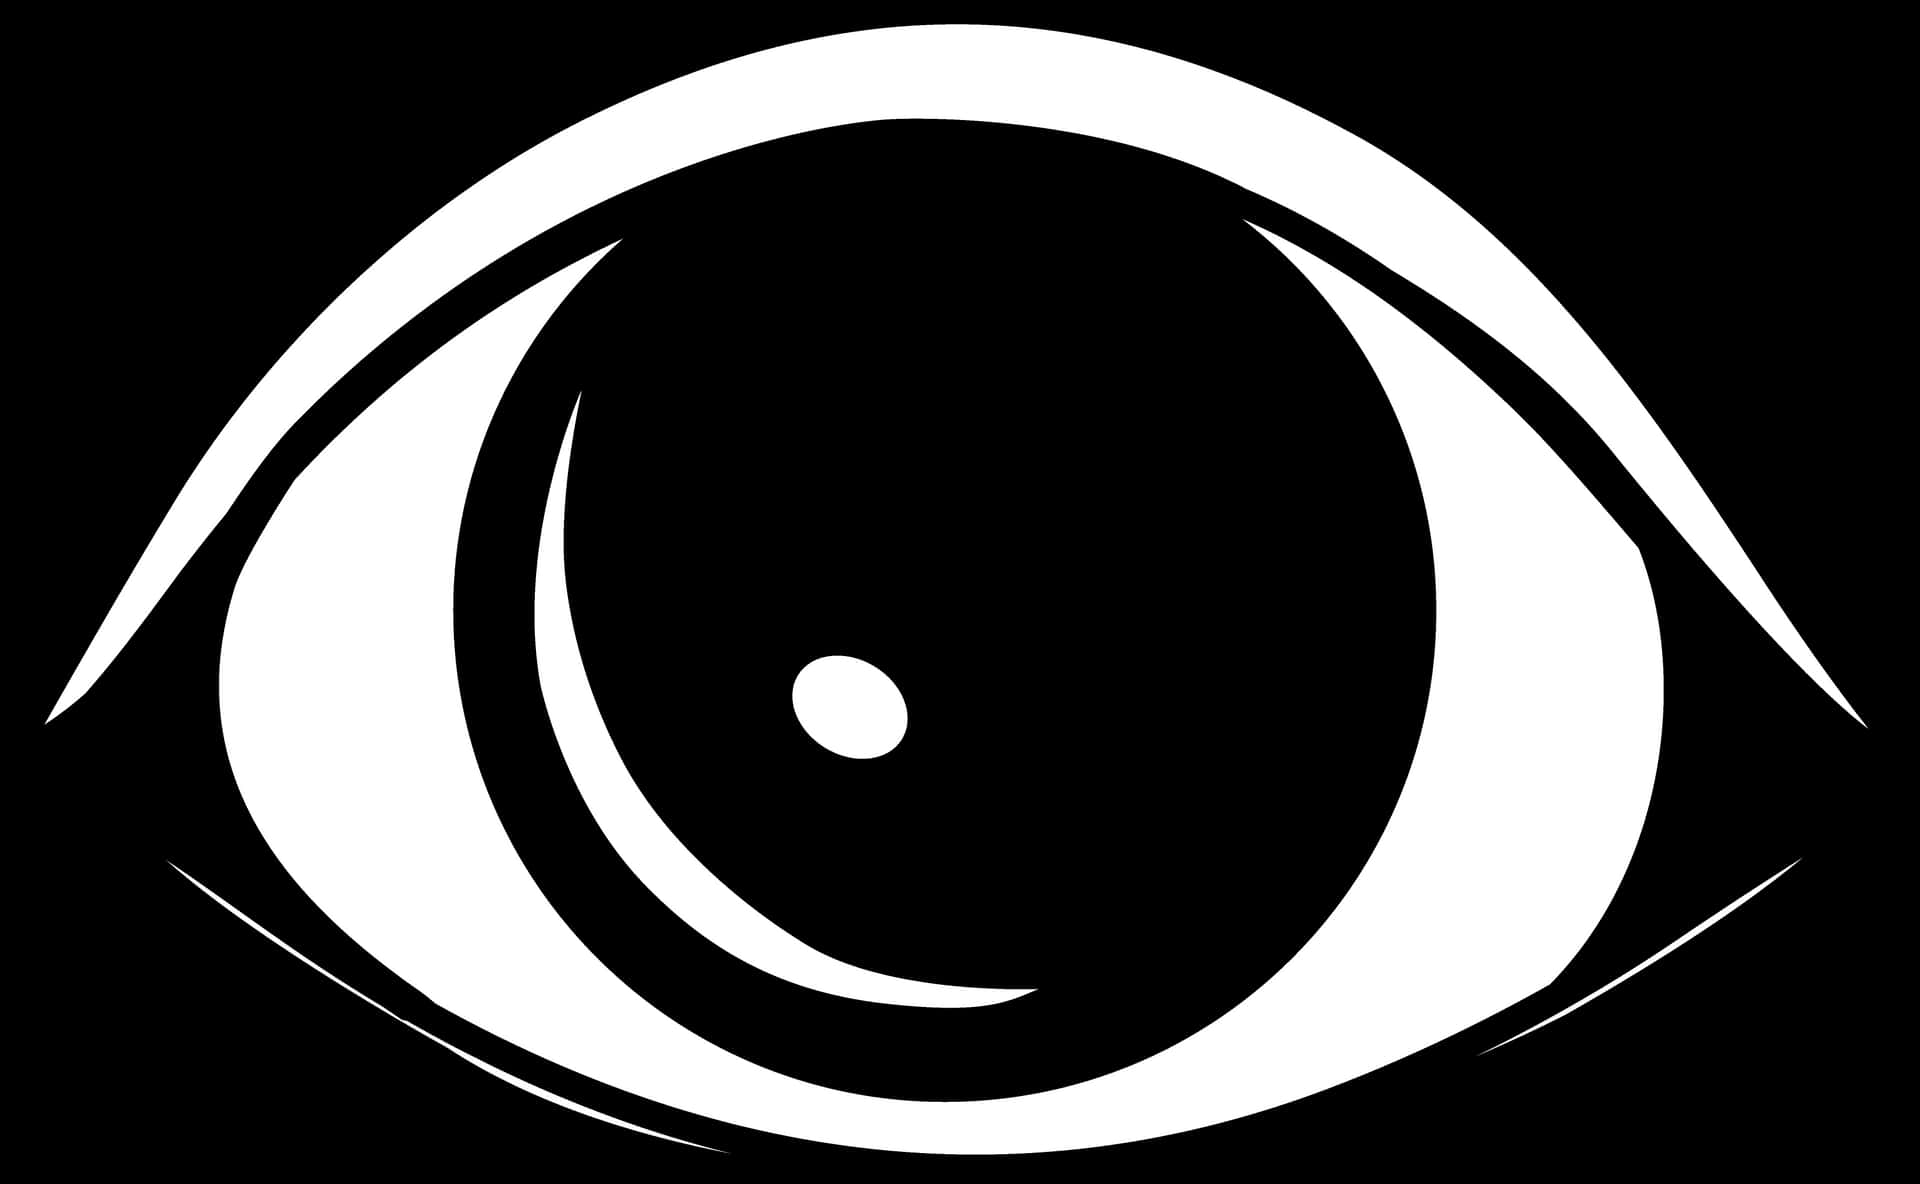 Abstract Eye Graphic Blackand White PNG image